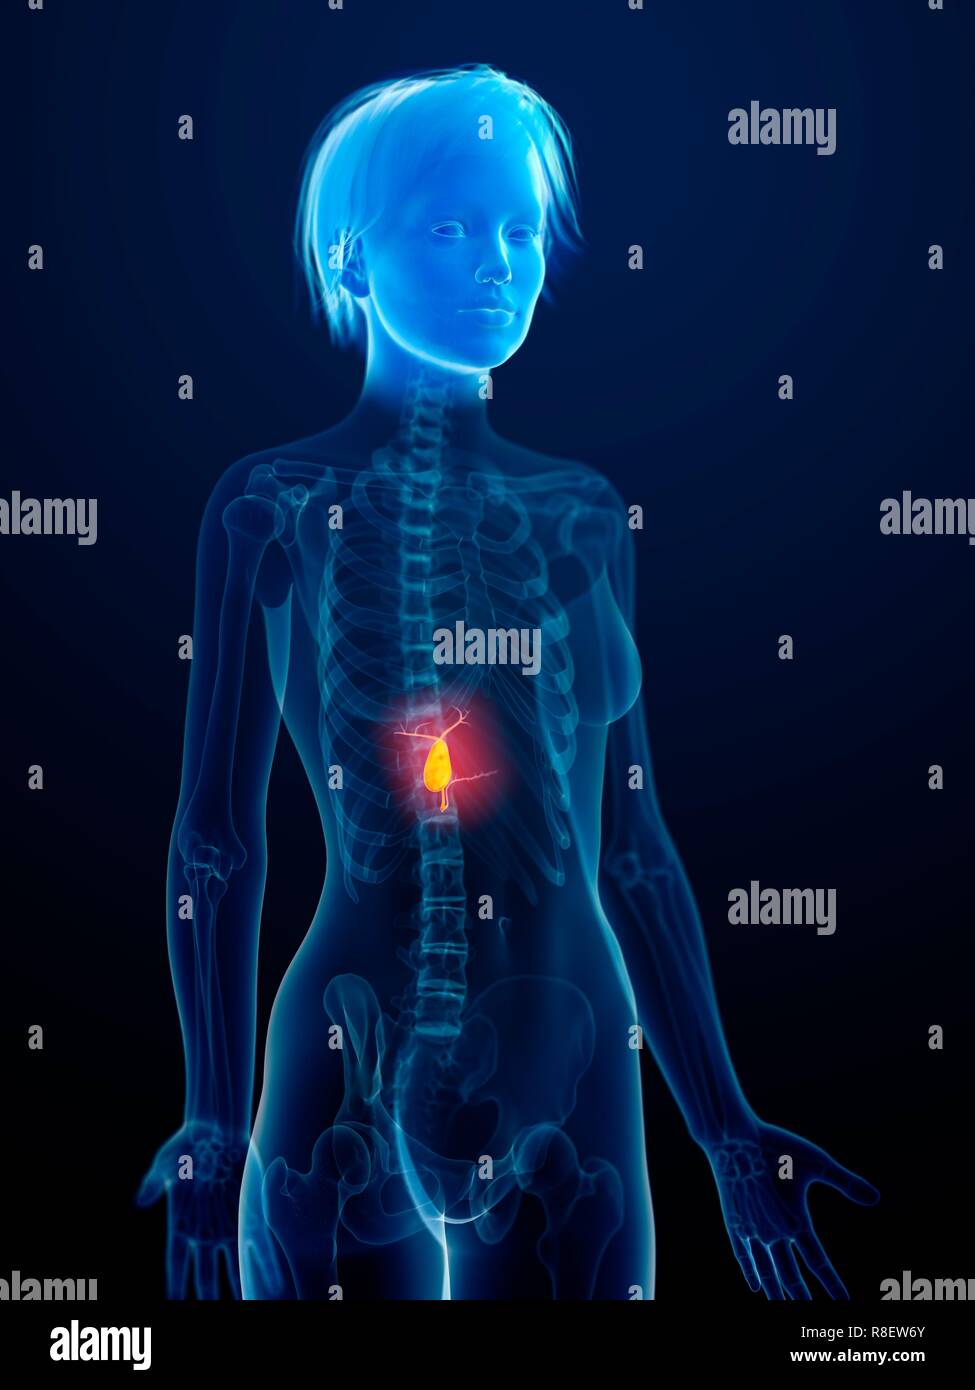 Illustration of an inflamed gallbladder. Stock Photo